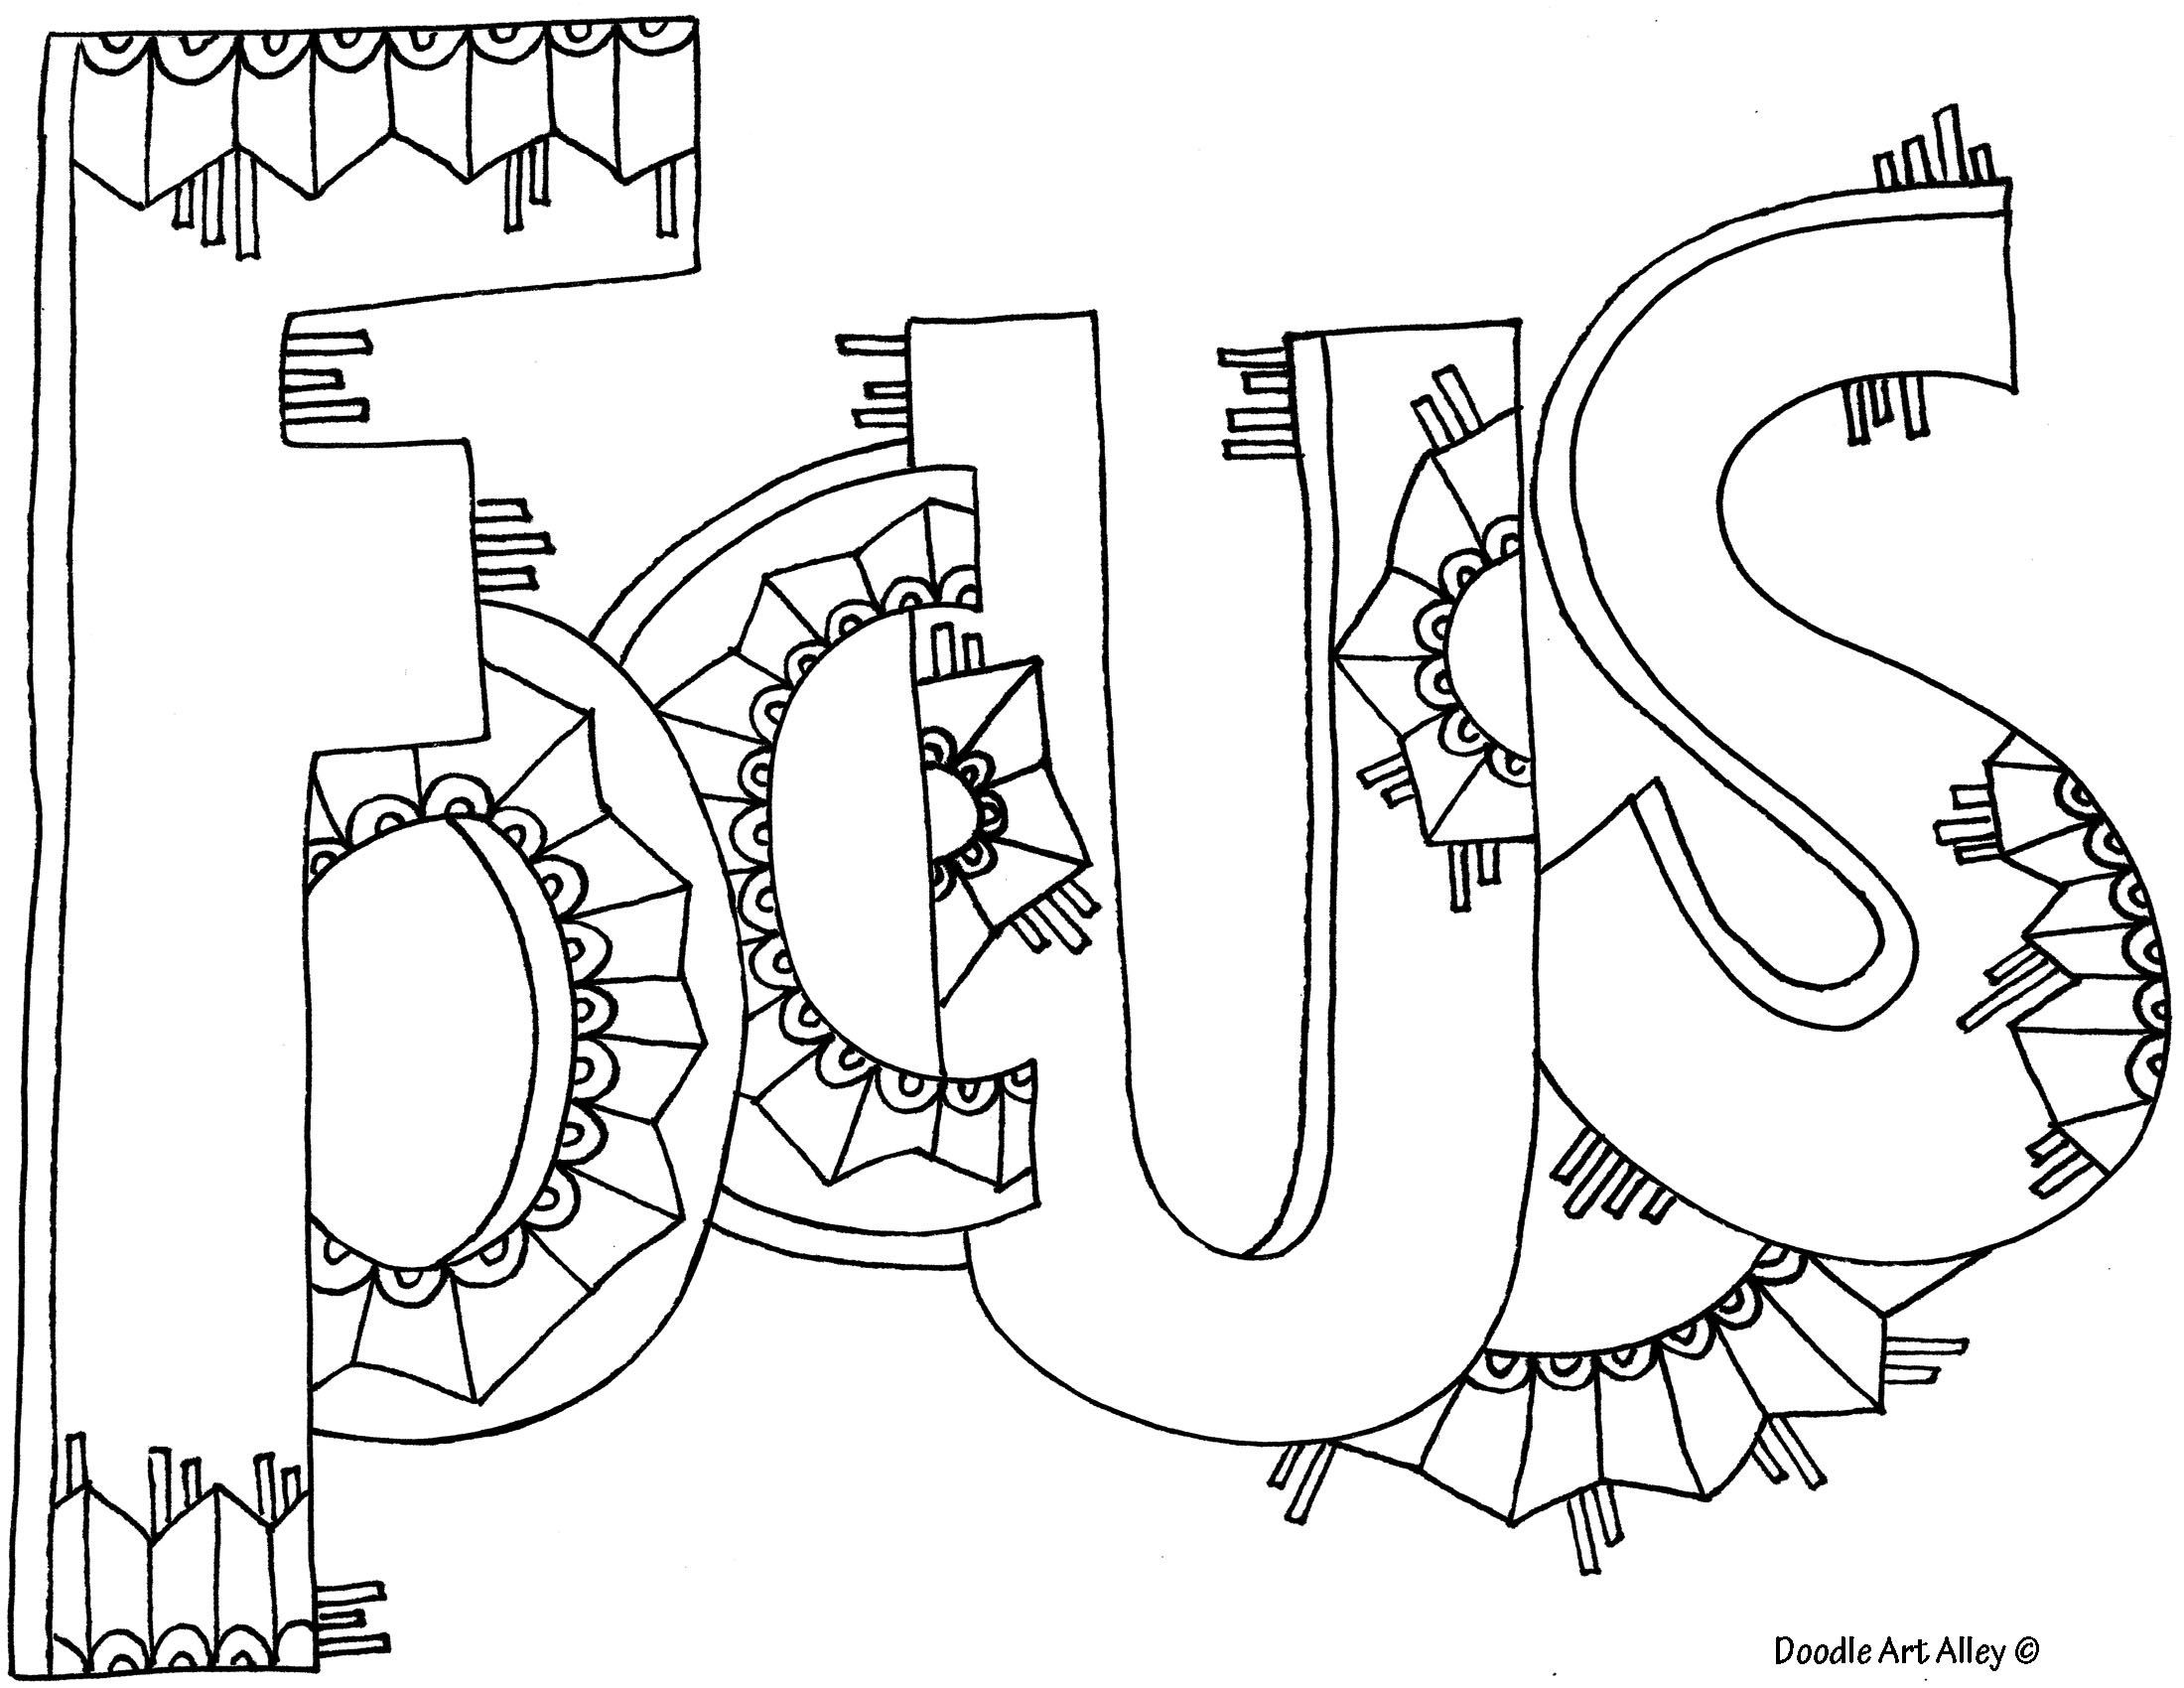 Motivational Coloring Pages For Kids
 Inspirational Art Coloring Pages Coloring Pages